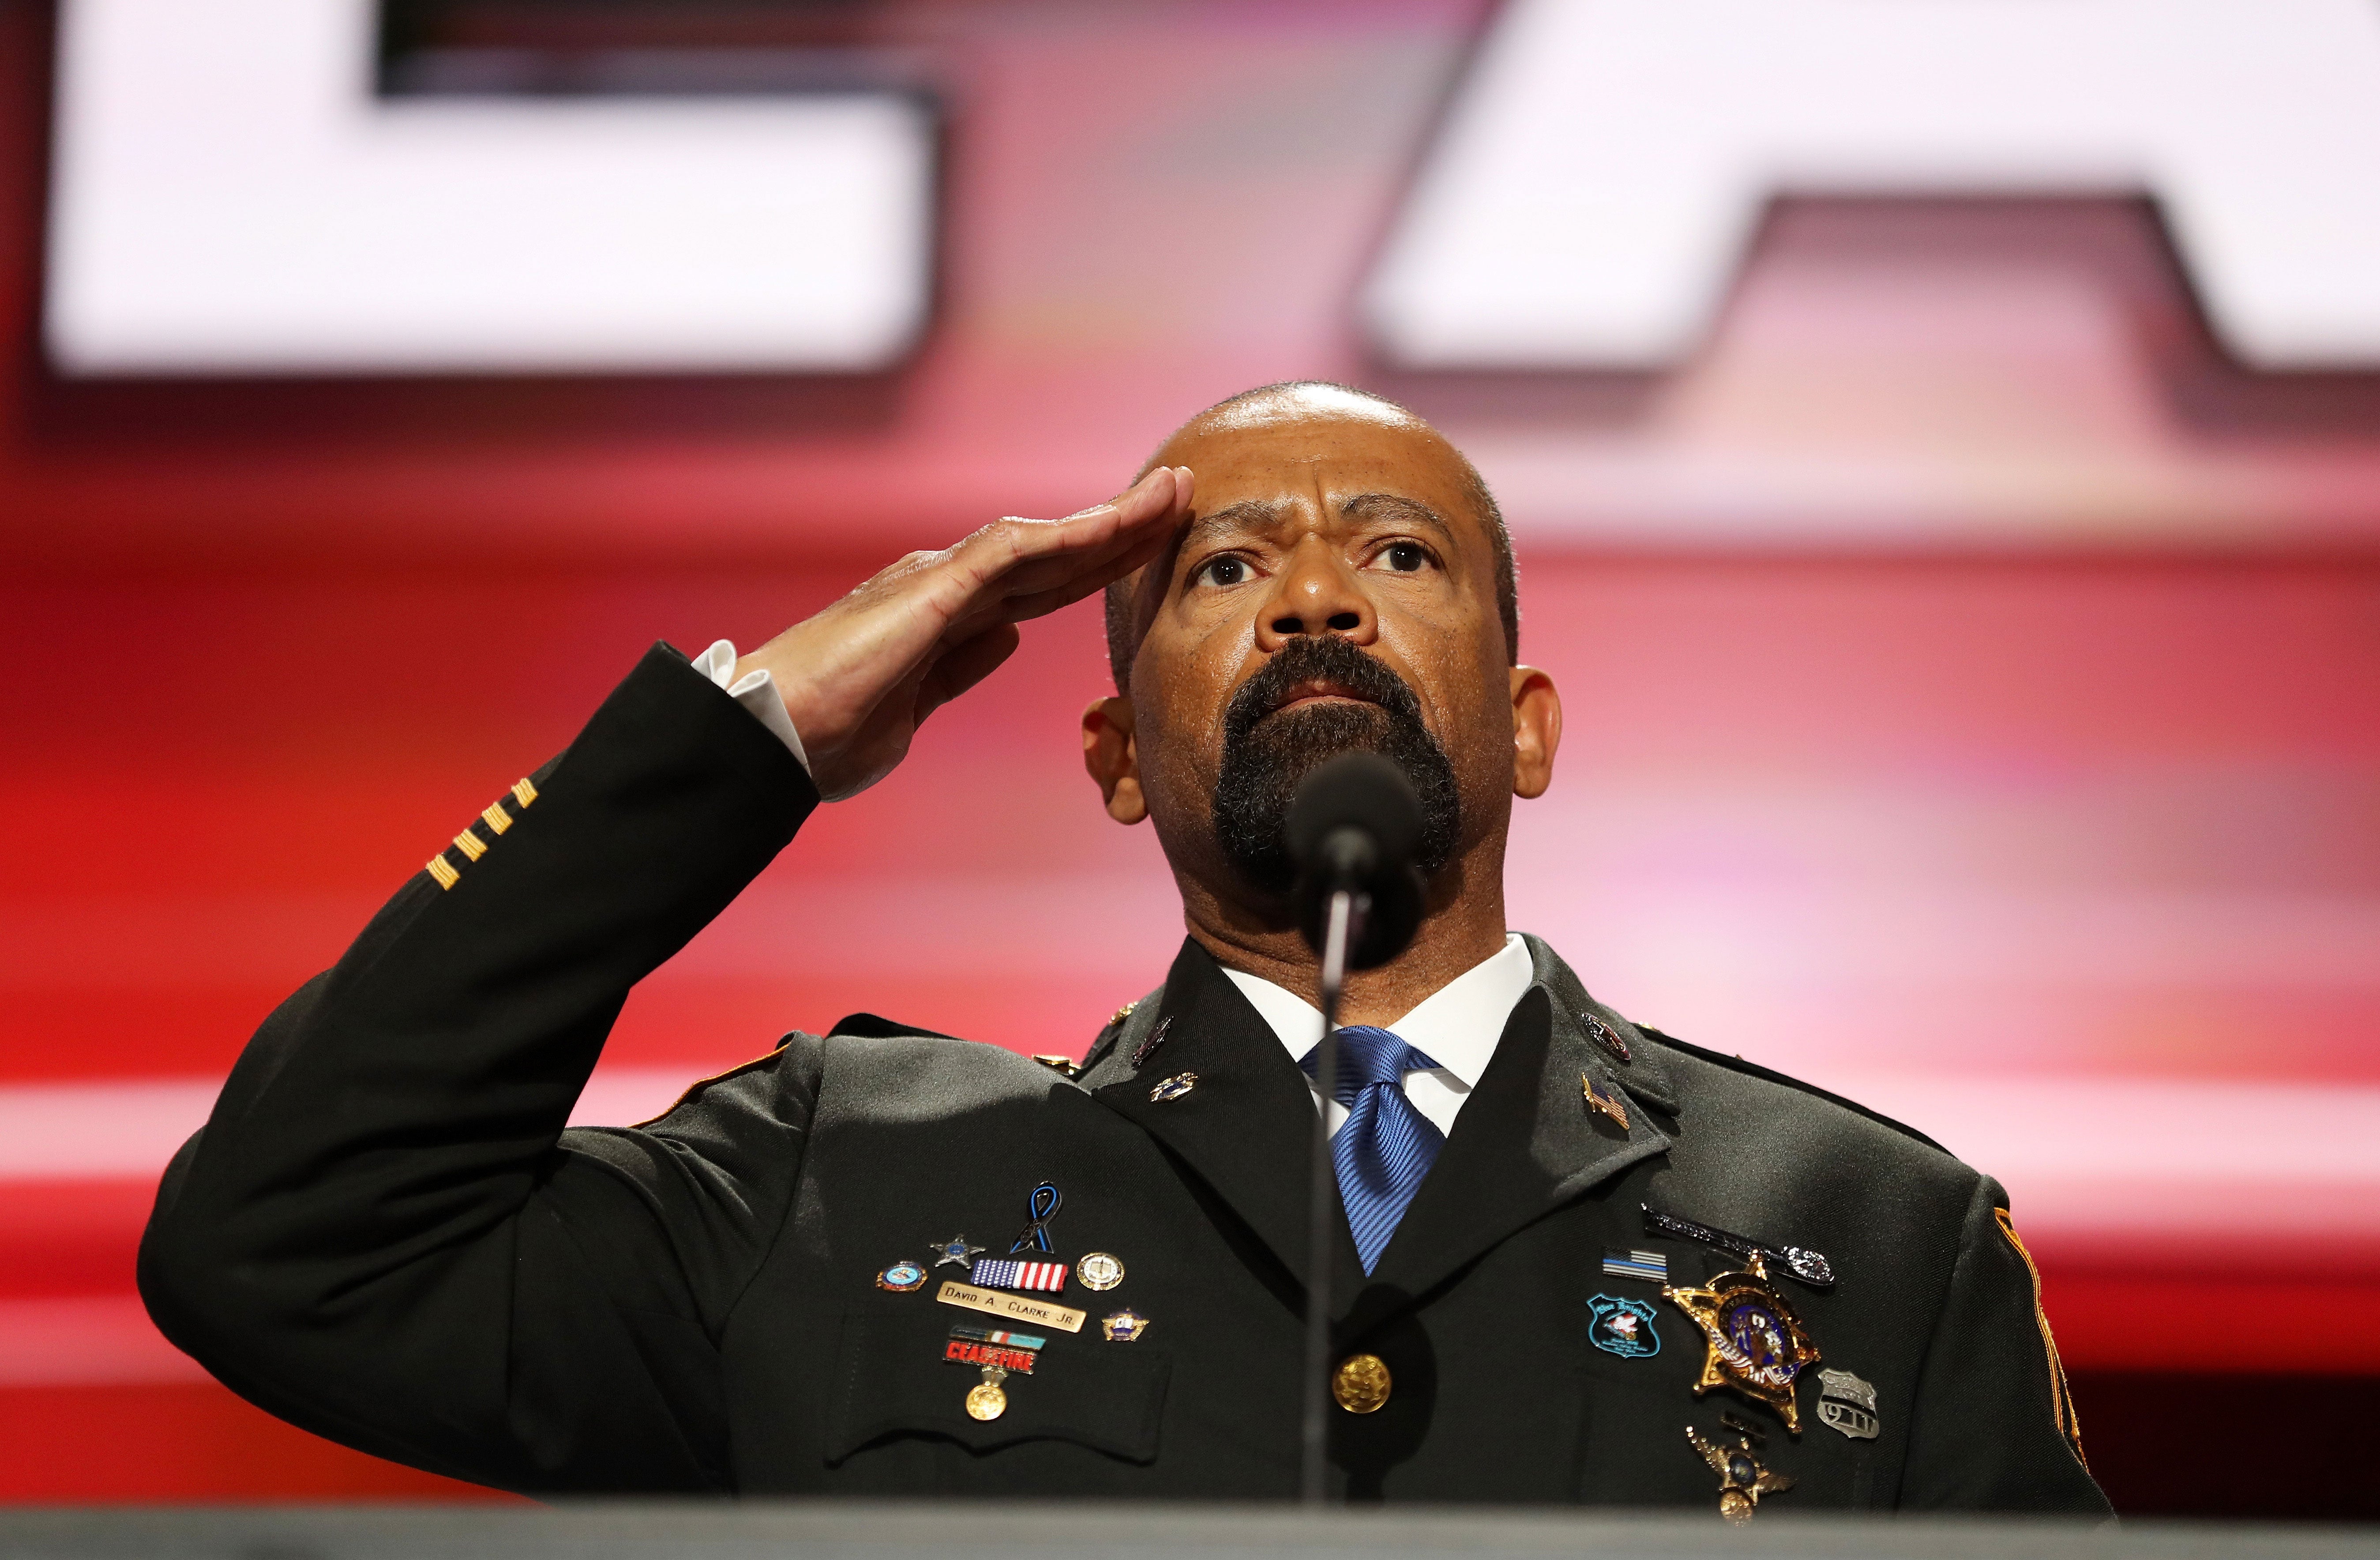 Sheriff David Clarke Claims Role At Department of Homeland Security, DHS Says Not So Fast
